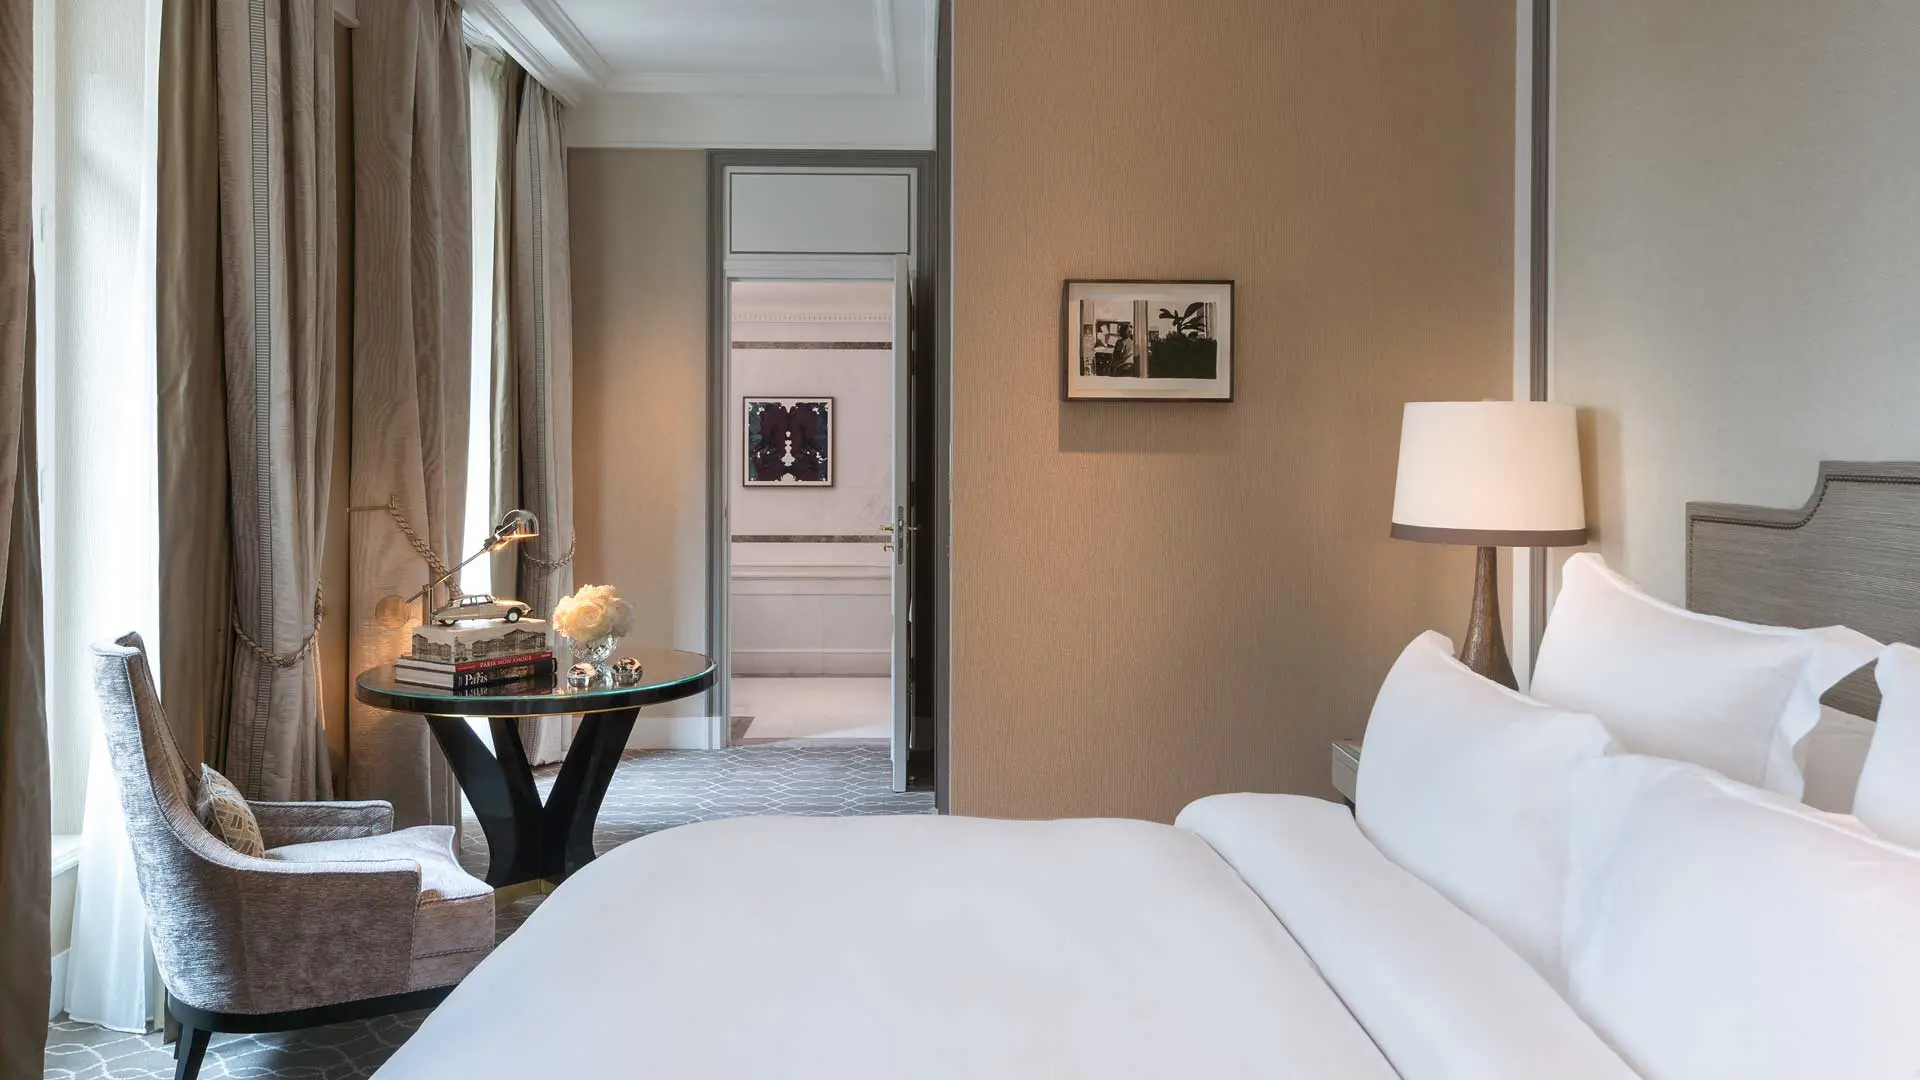 Hotel review Accommodation' - Hôtel de Crillon, A Rosewood Hotel  - 0